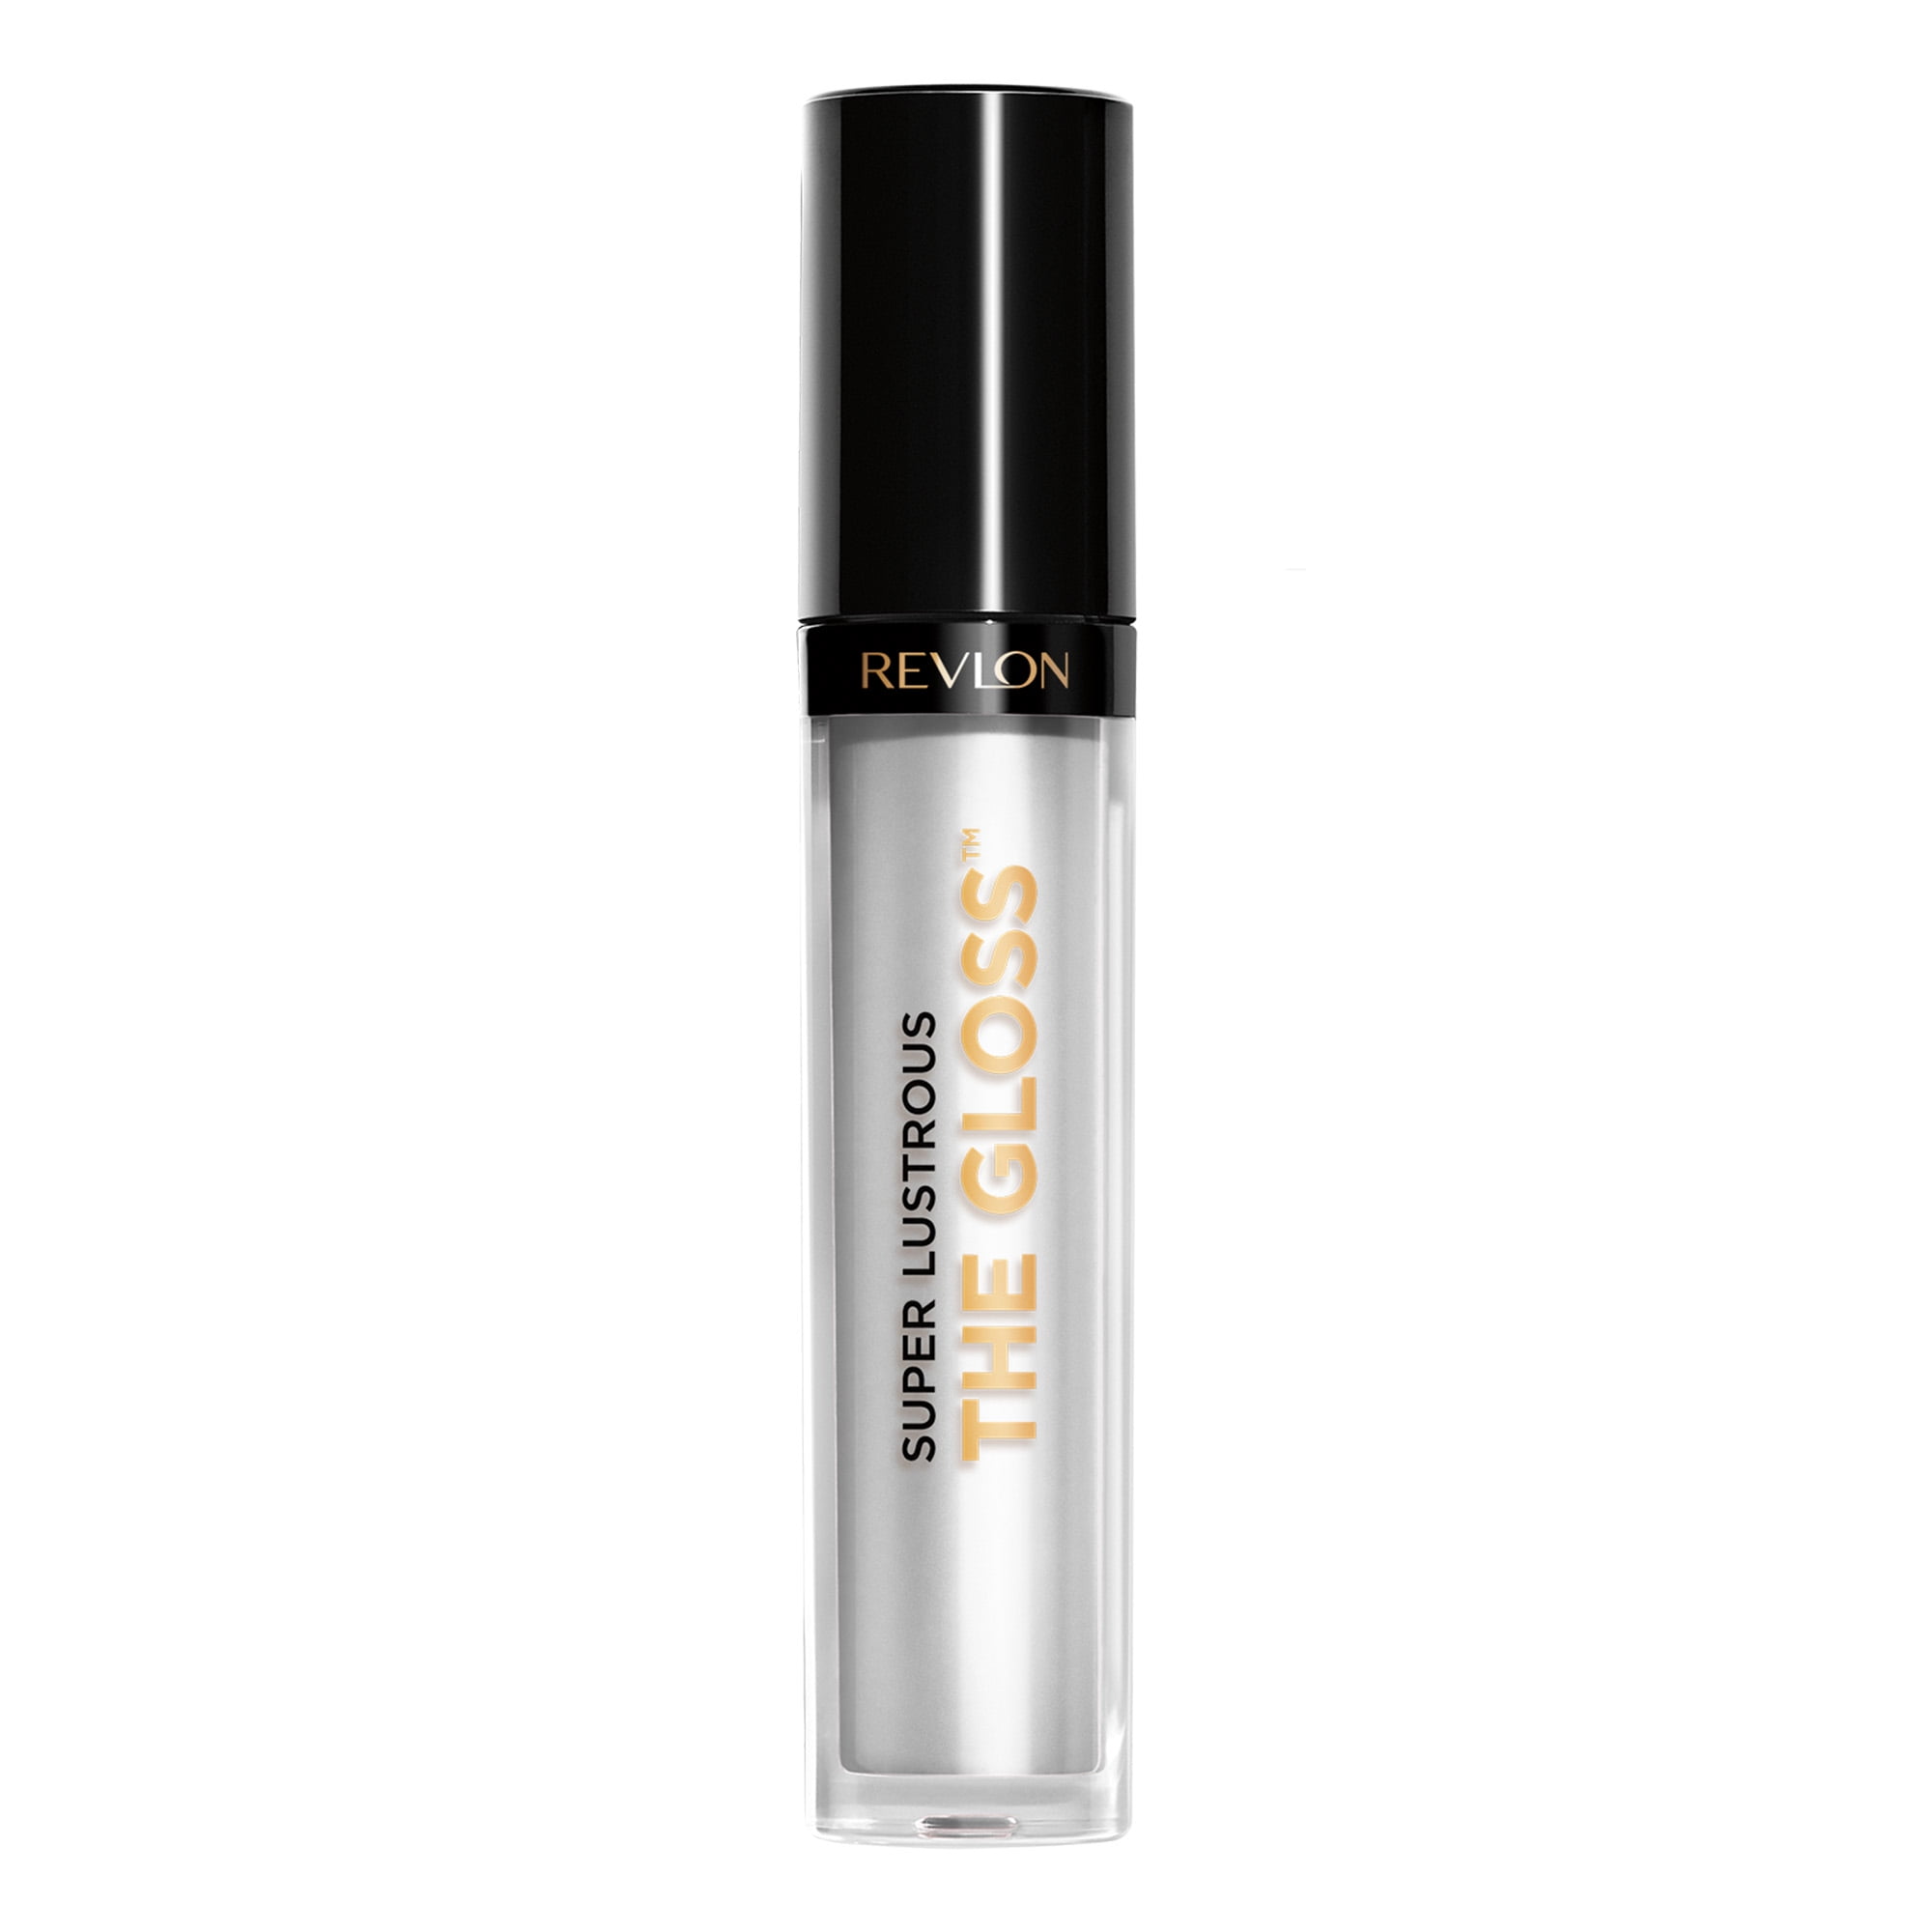 Revlon Super Lustrous The Gloss, Non-Sticky, High Shine Finish, 200 Crystal Clear, 200 Crystal Clear, 0.13 oz